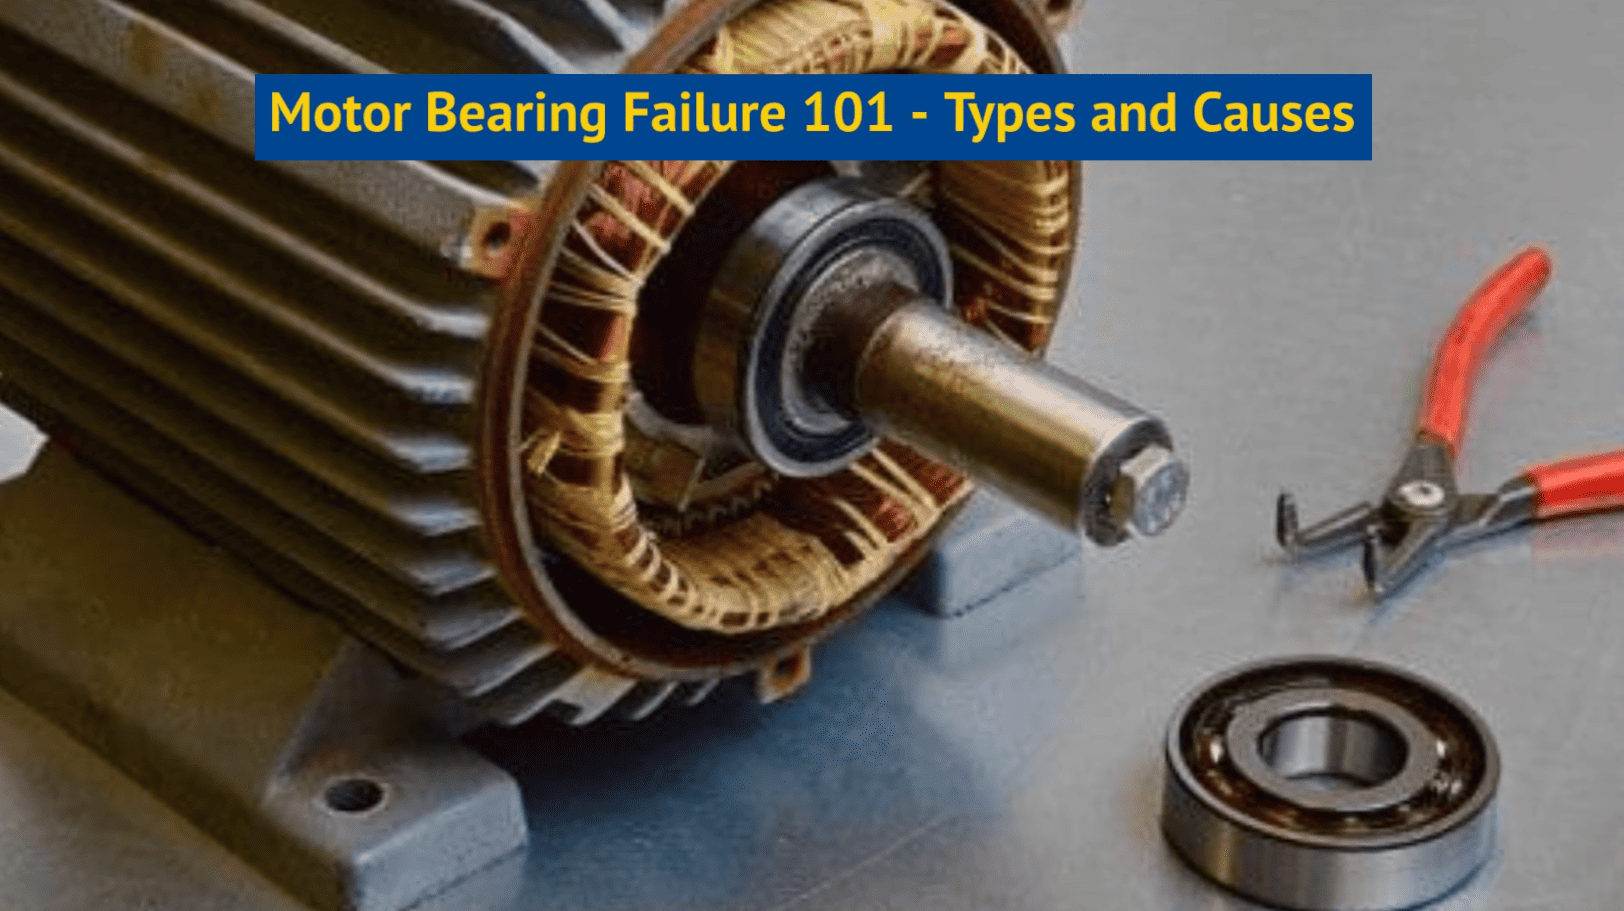 Common Causes for Motor Bearing Failure